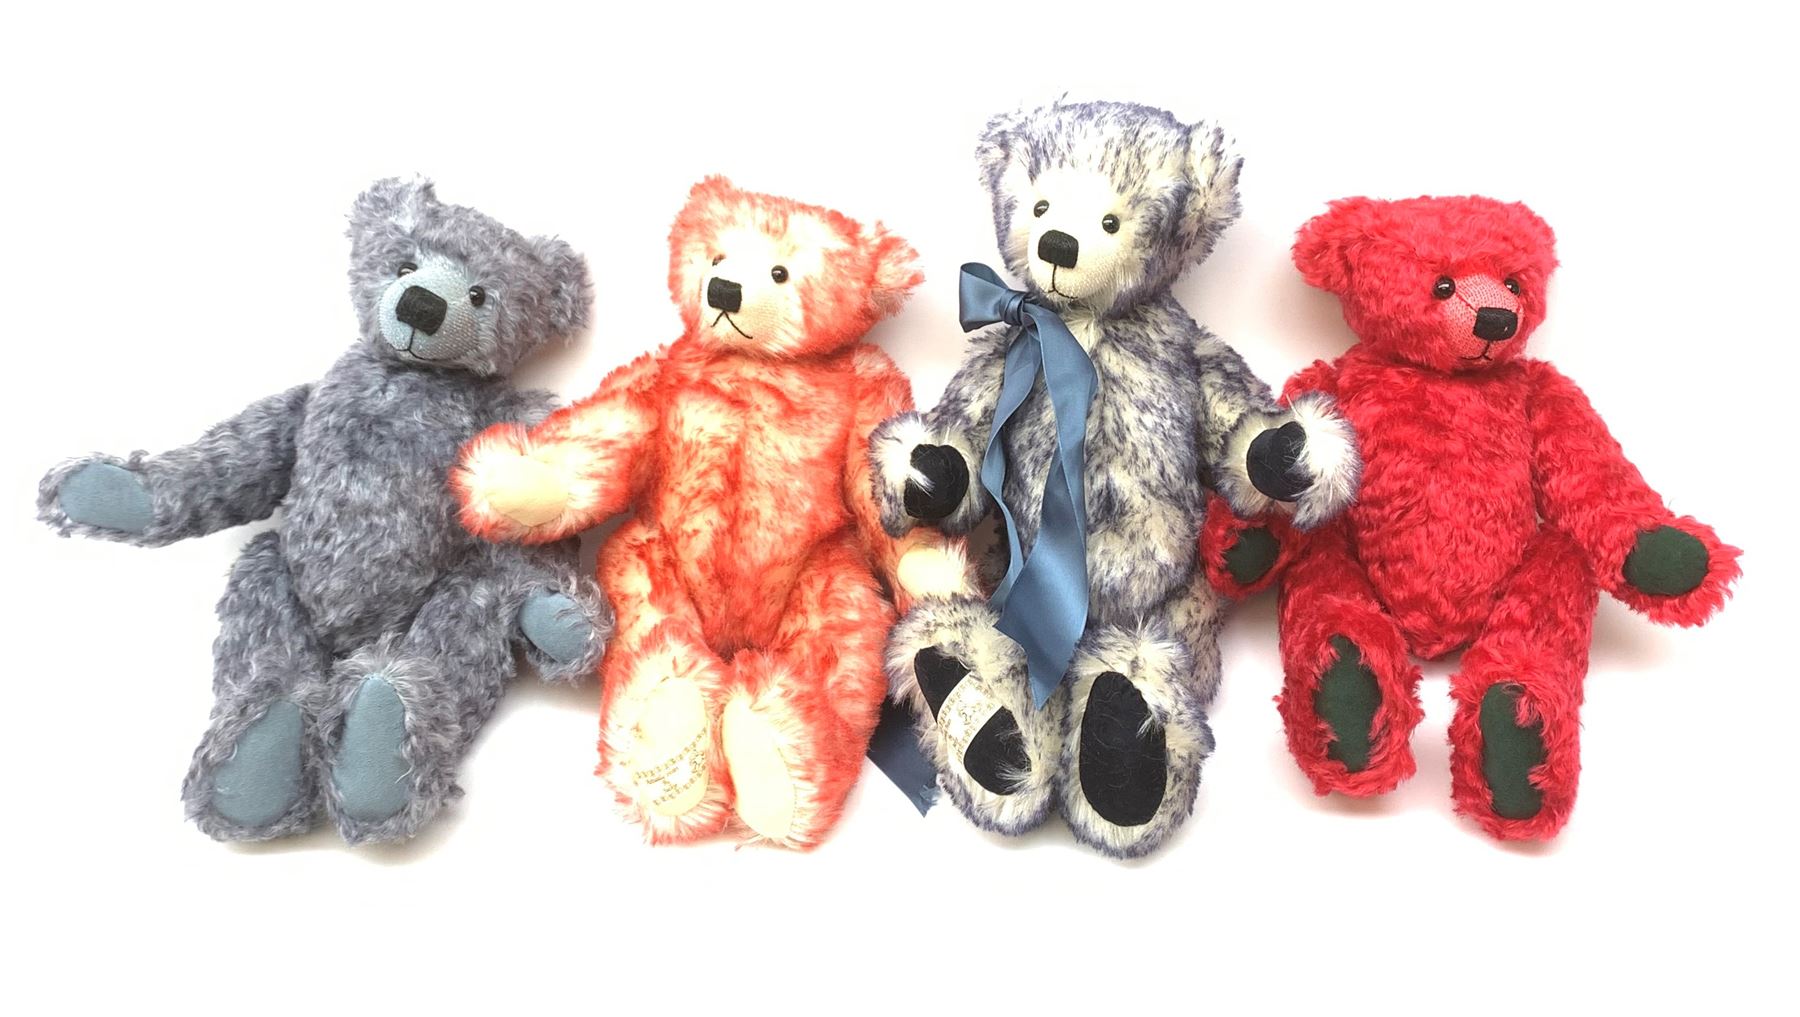 Four modern ABJ (Actually Bears by Jackie) coloured teddy bears including limited edition blue No.1/